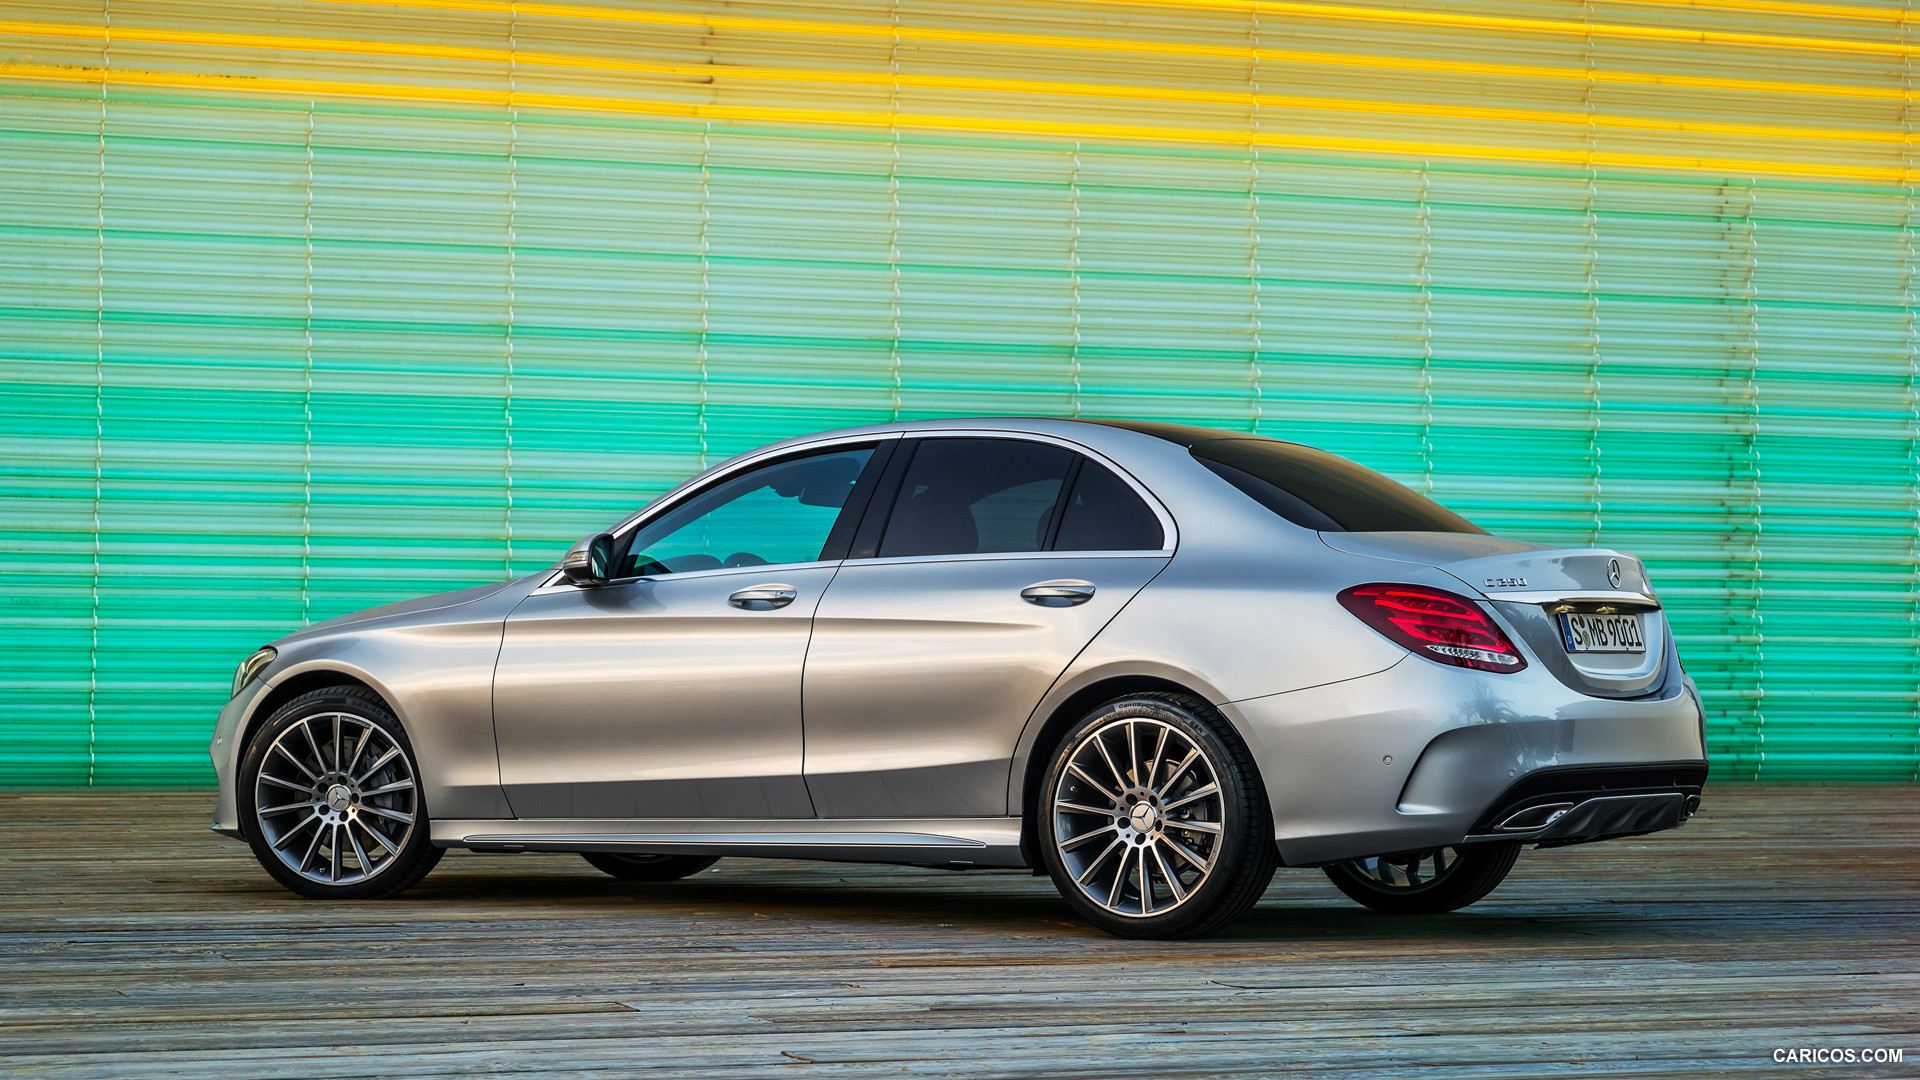 2015 Mercedes-Benz C-Class C250 (AMG Line) - Side, #162 of 181